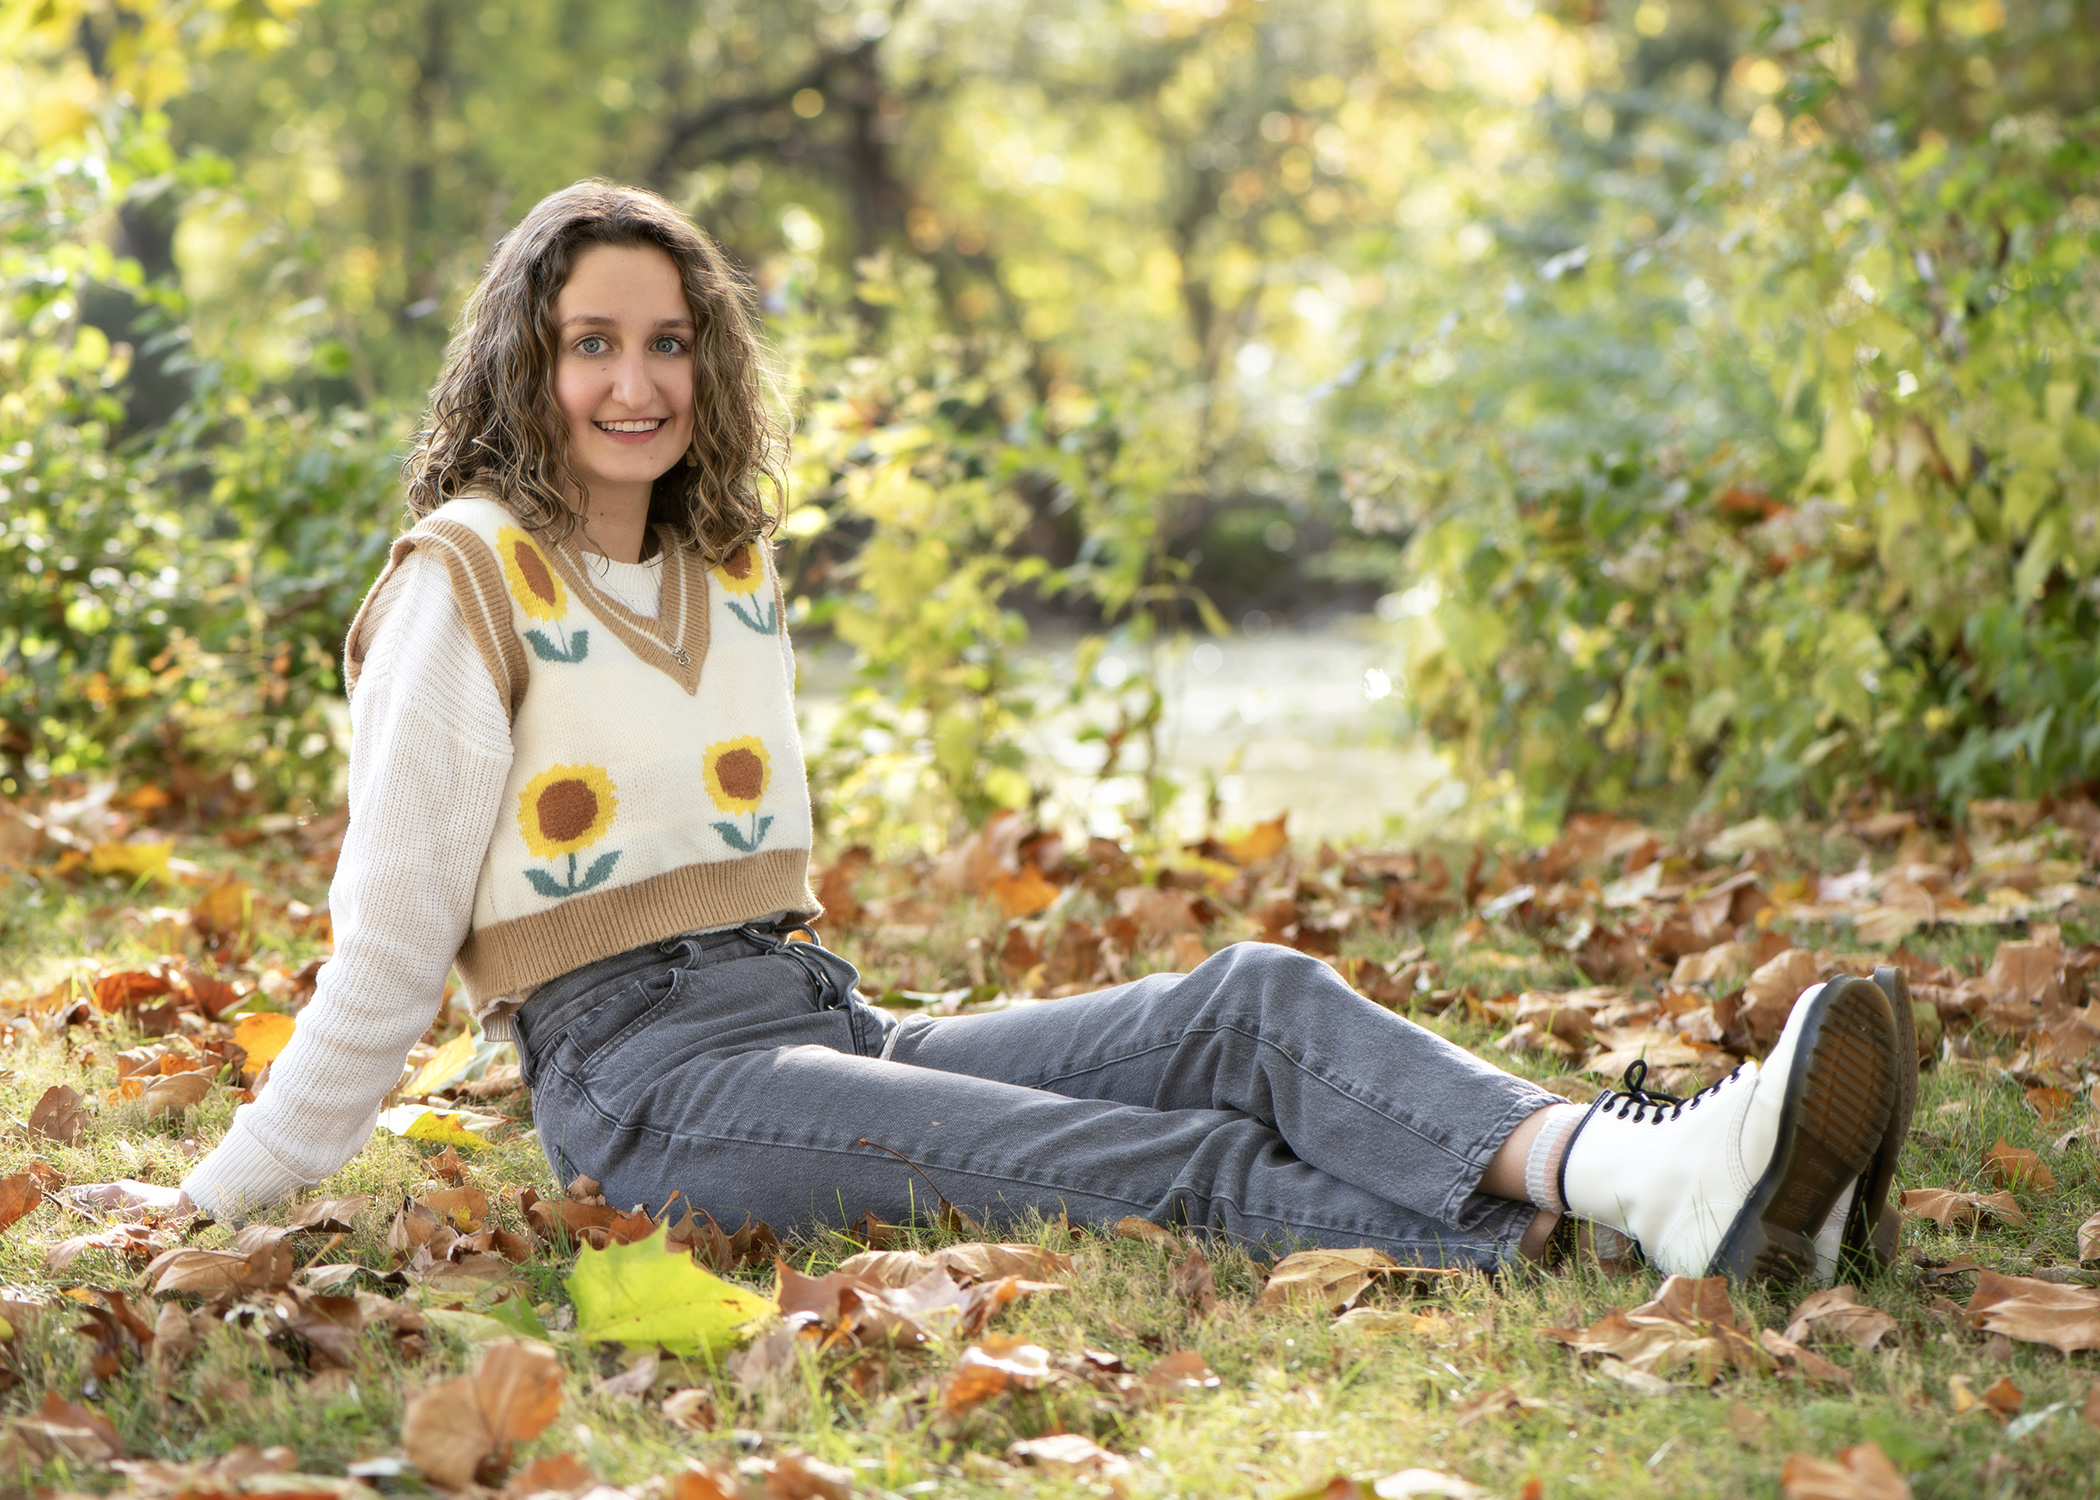 high school senior girl photographed in the fall by Dan Cleary Dayton Ohio